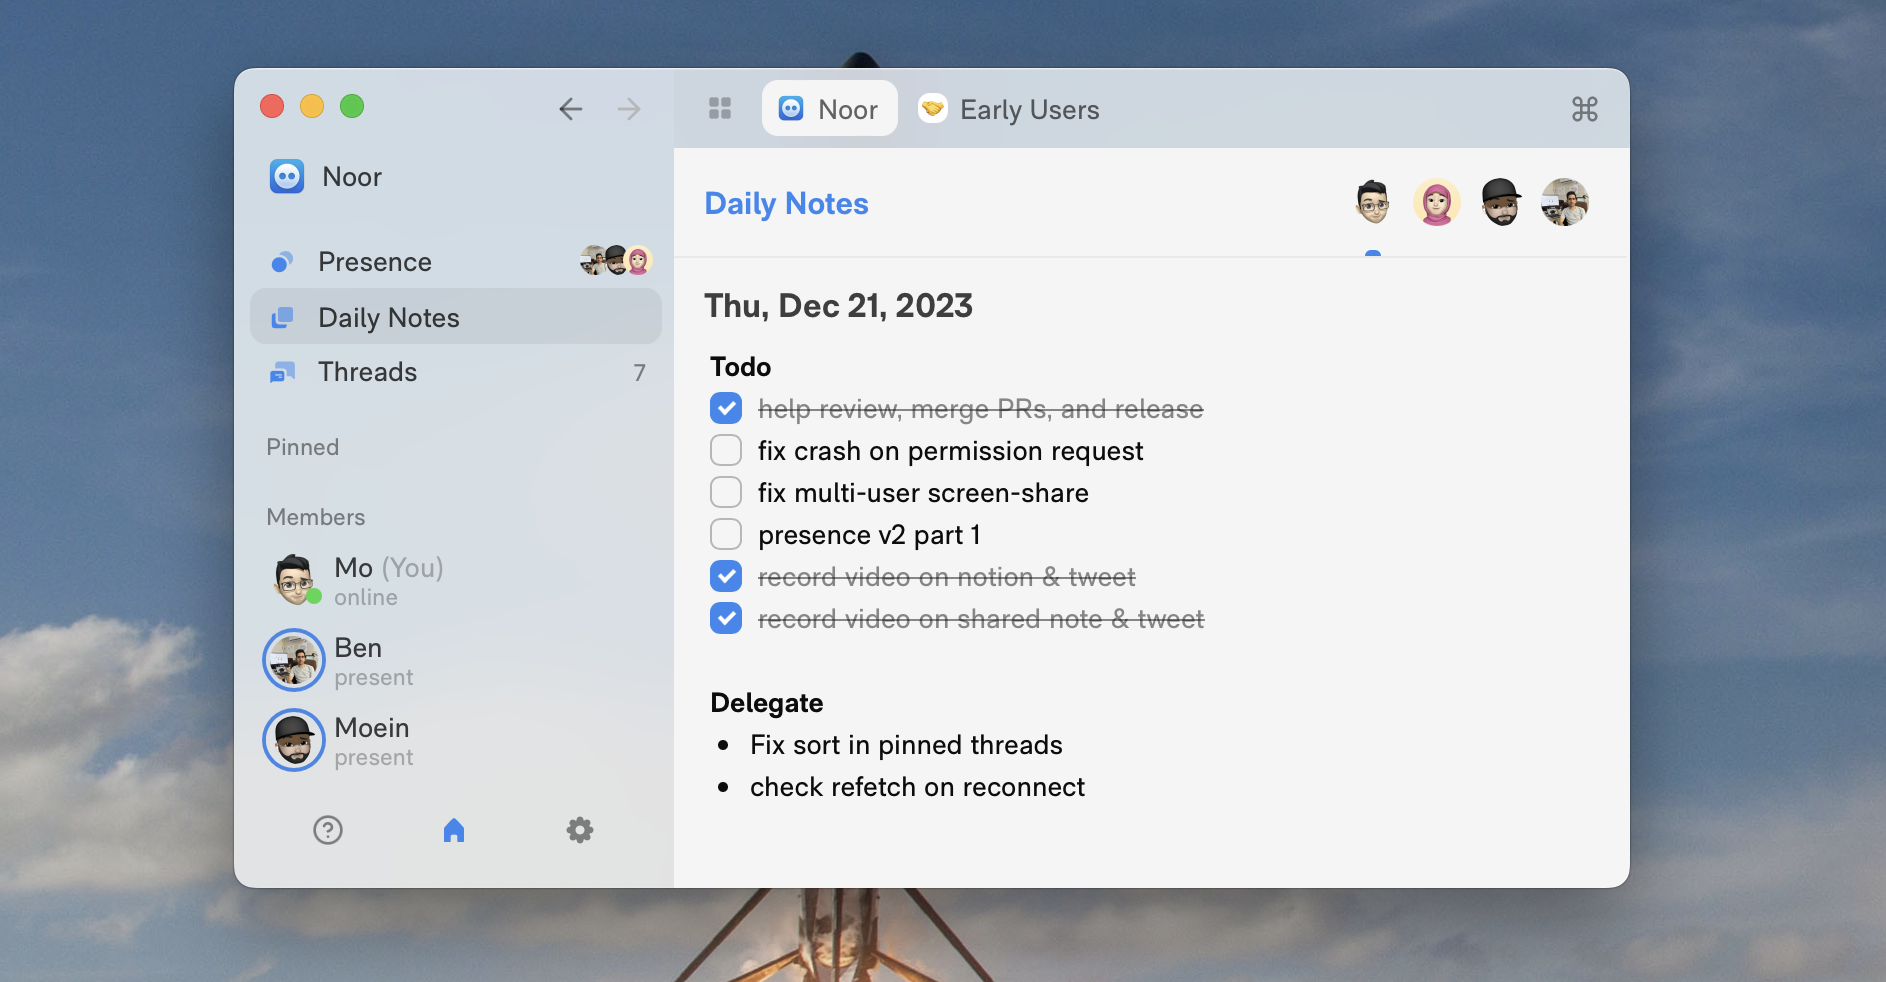 Screen-shot of new daily notes user experience